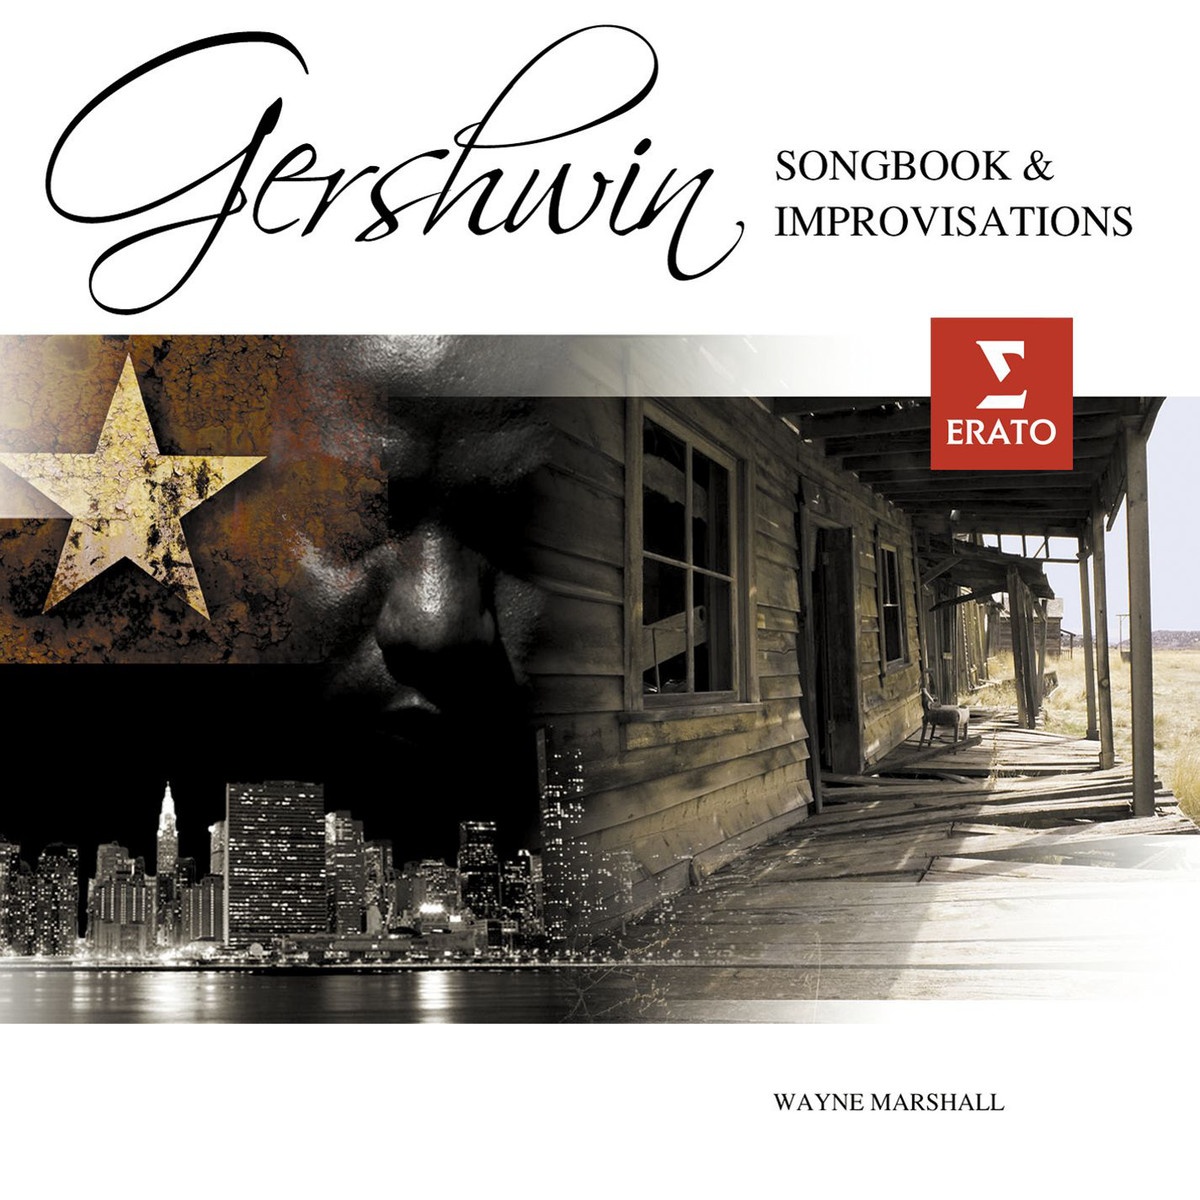 A Gershwin Songbook: improvisations on songs by George Gershwin: By Strauss (The Show is On)